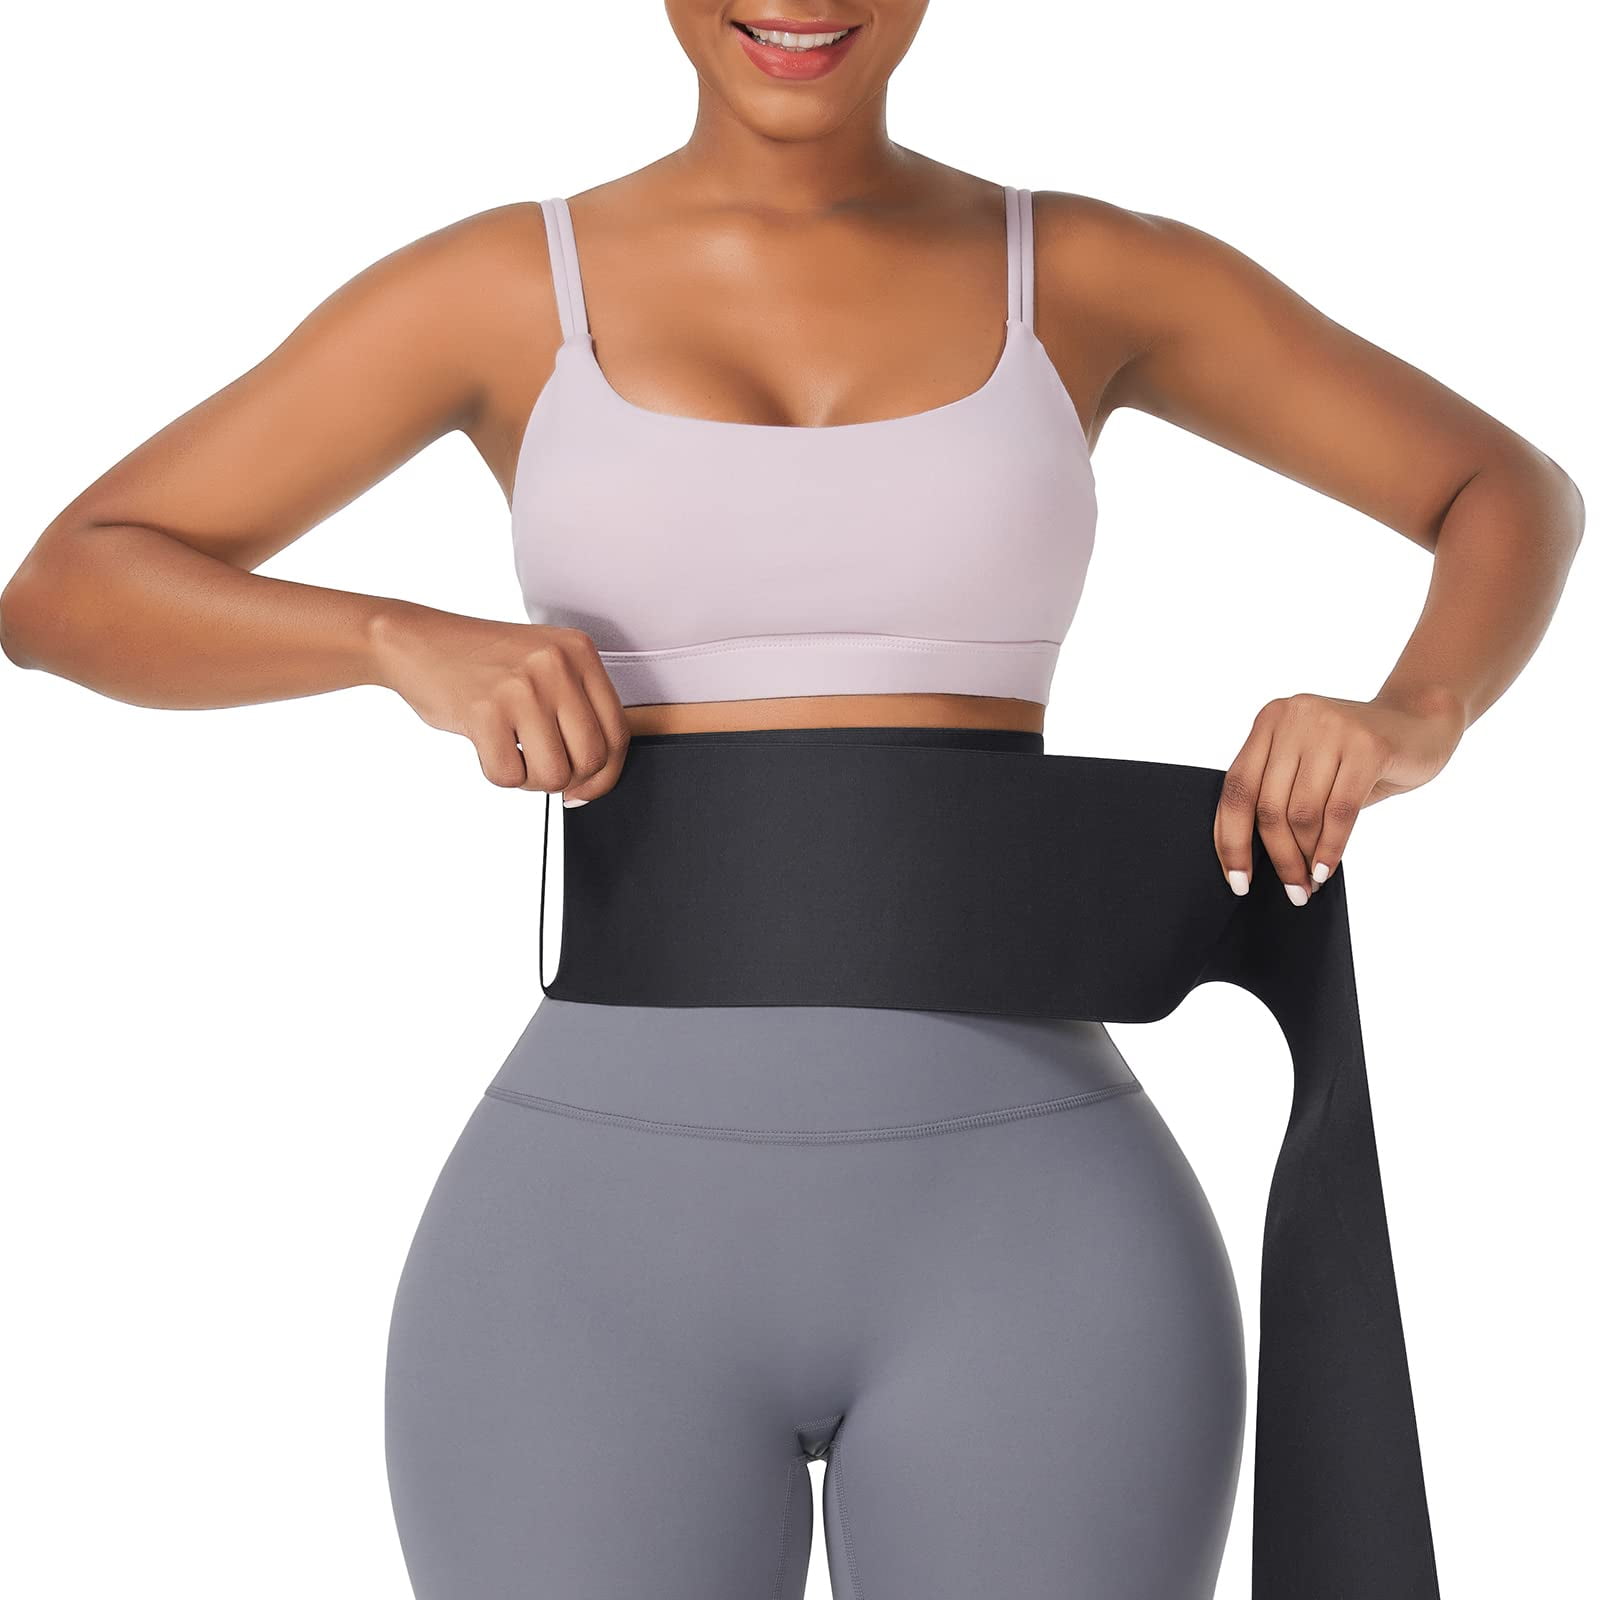 Adjust Your Snatch Waist Trainer Wrap Miracle Tummy Wrap Sweat Workout Belt Waist Trimmer for Women XXL and UP Belly Body Shaper Compression Wrap I Gym Accessories Tiktok Black